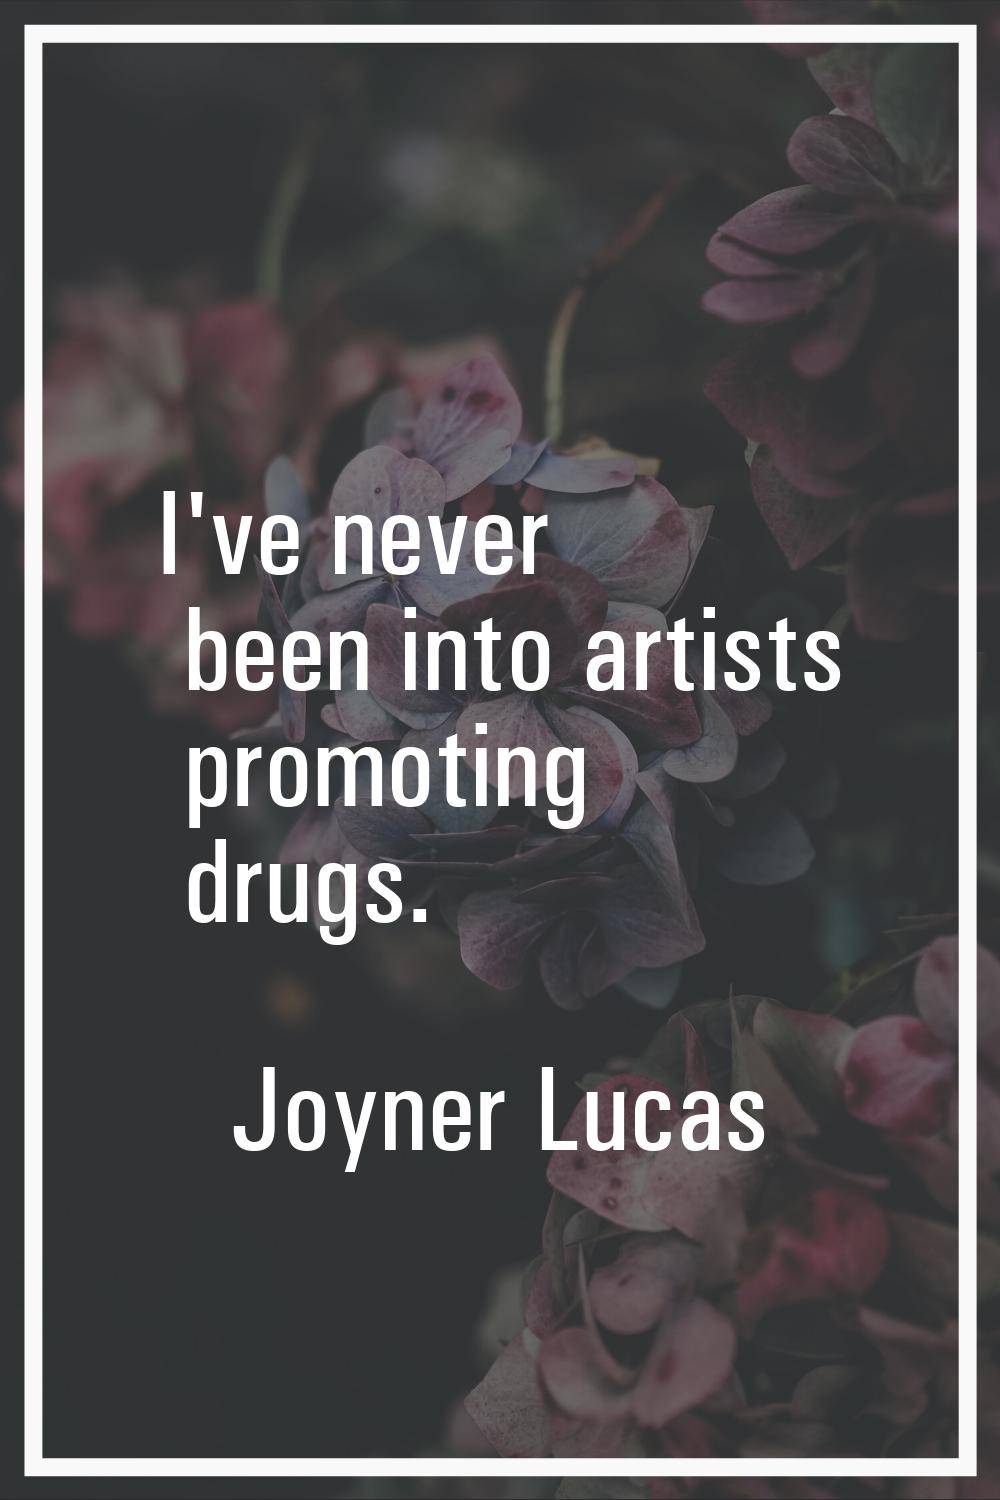 I've never been into artists promoting drugs.